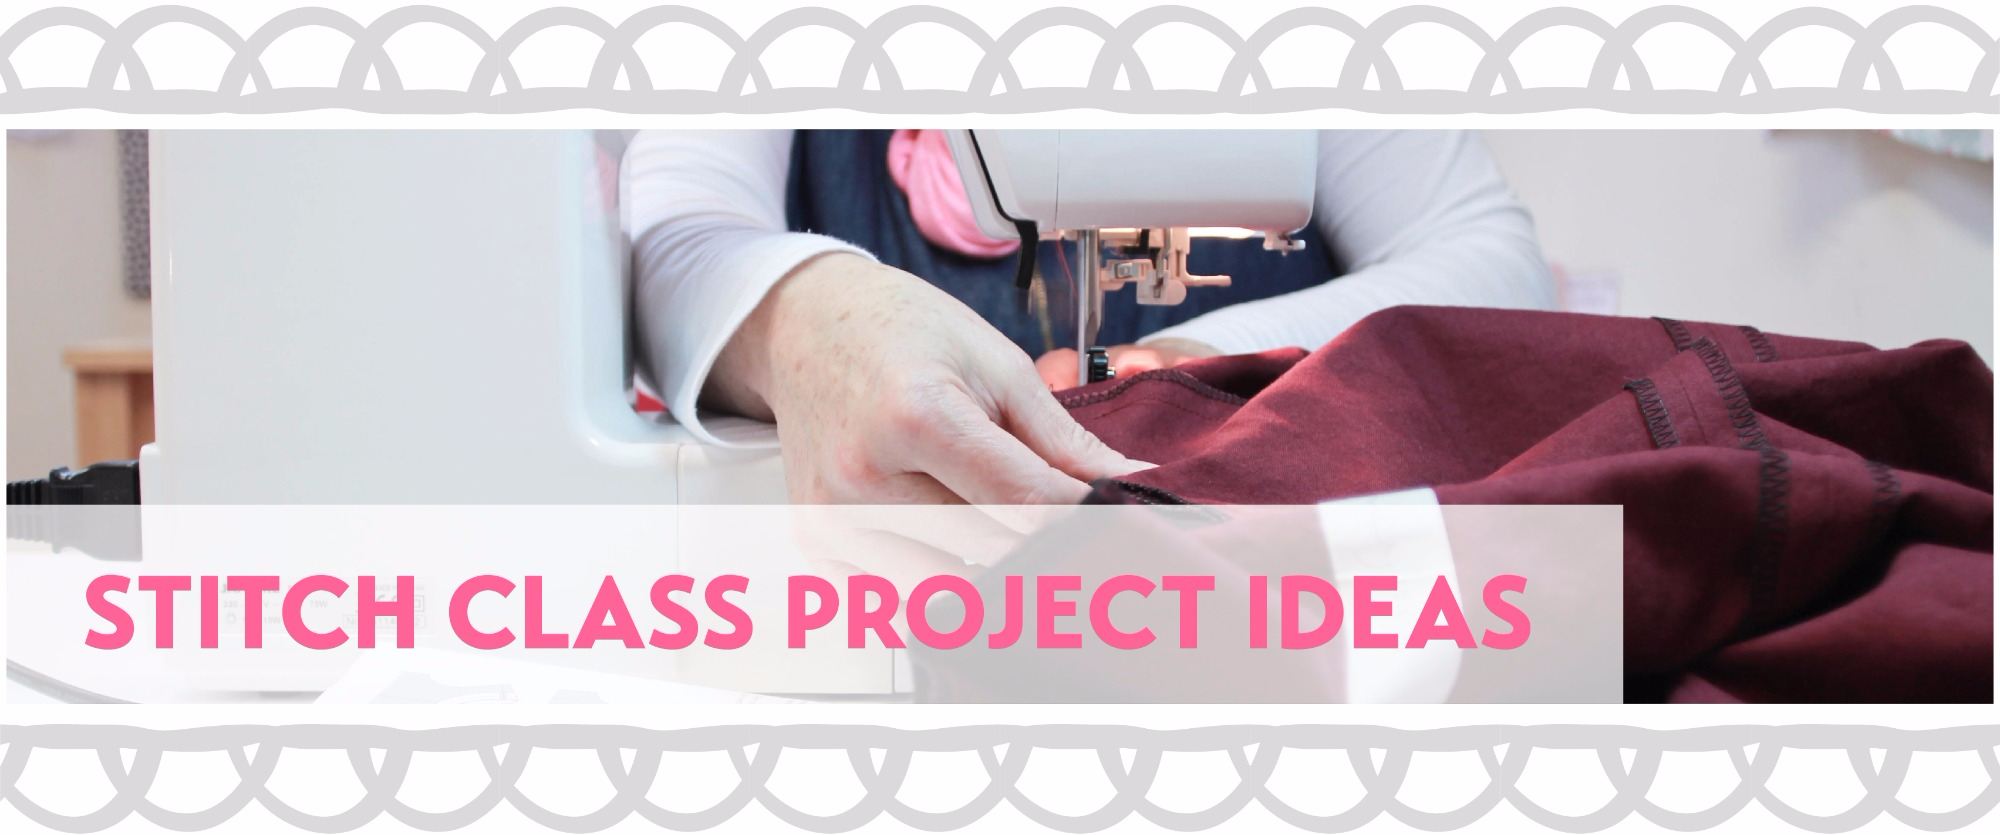 Sewing project ideas for Stitch Sewing & Clothes making Sessions in brighton and Hove, East Sussex